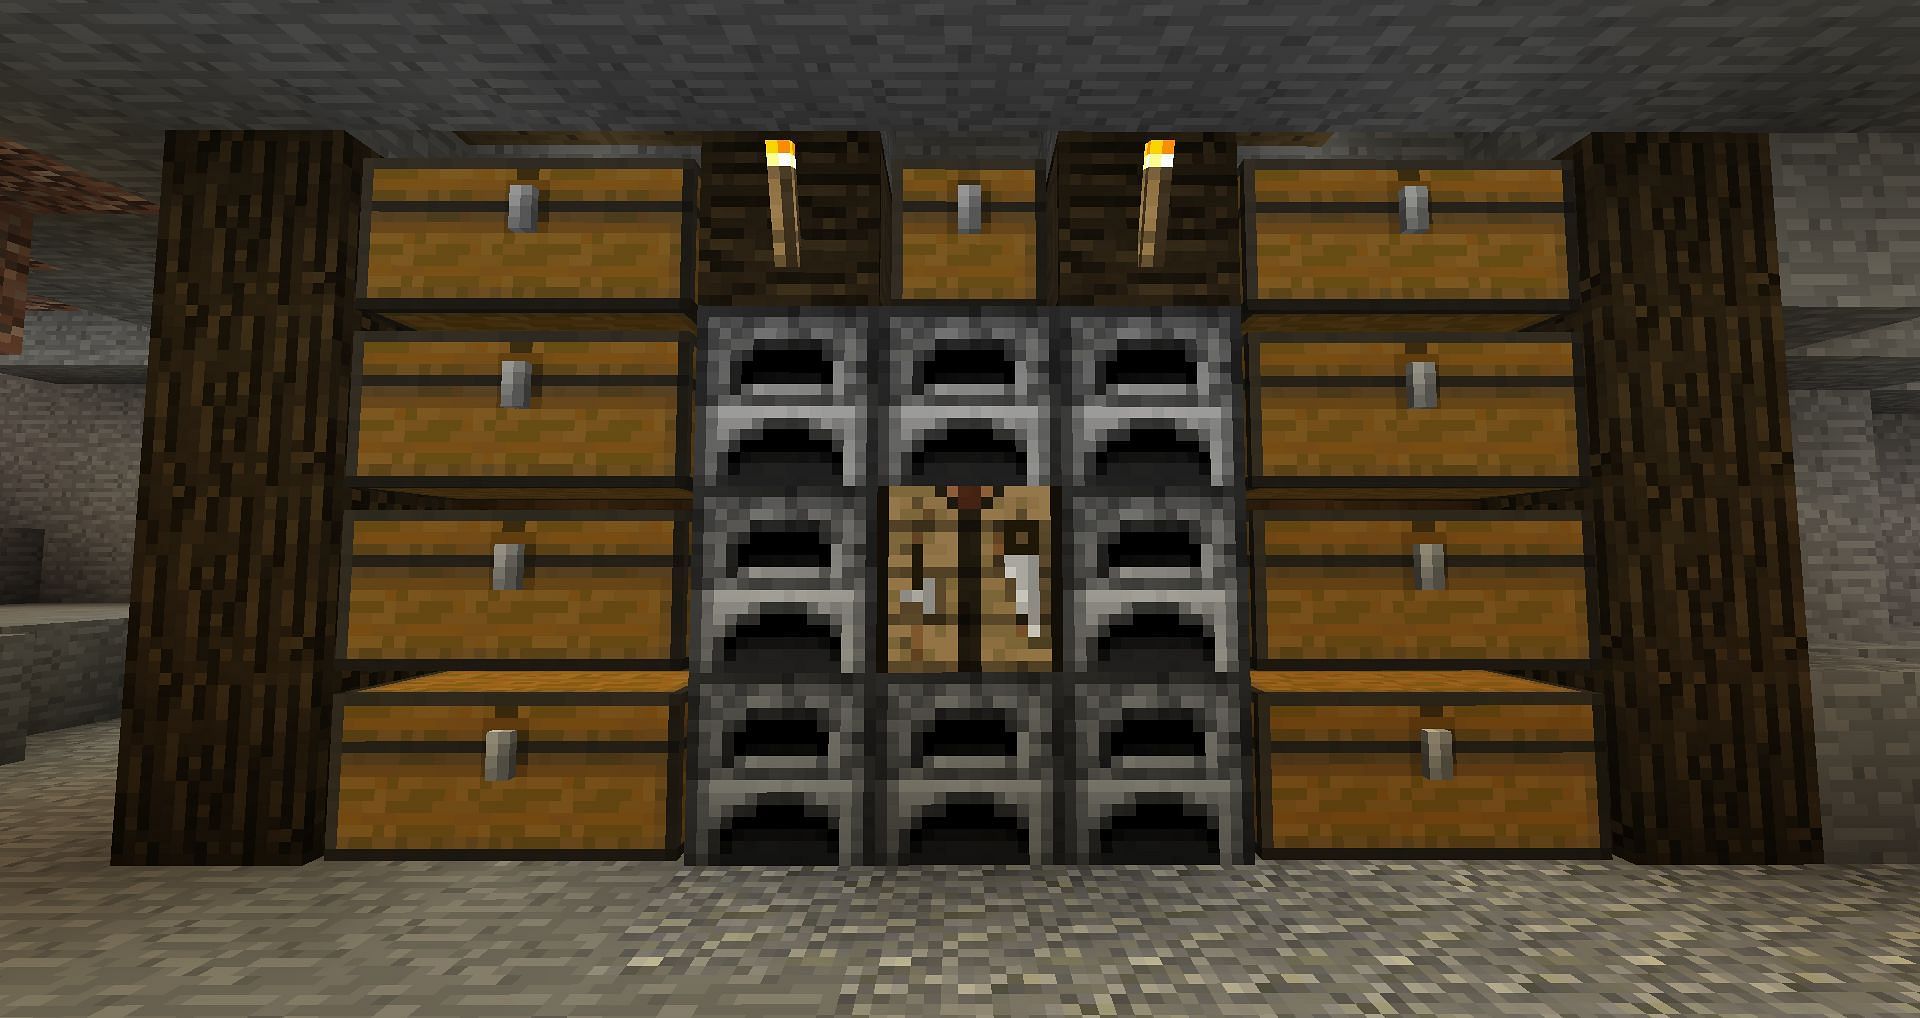 Centralizing the ability to forge and craft saves traps between blocks (Image via Mojang)